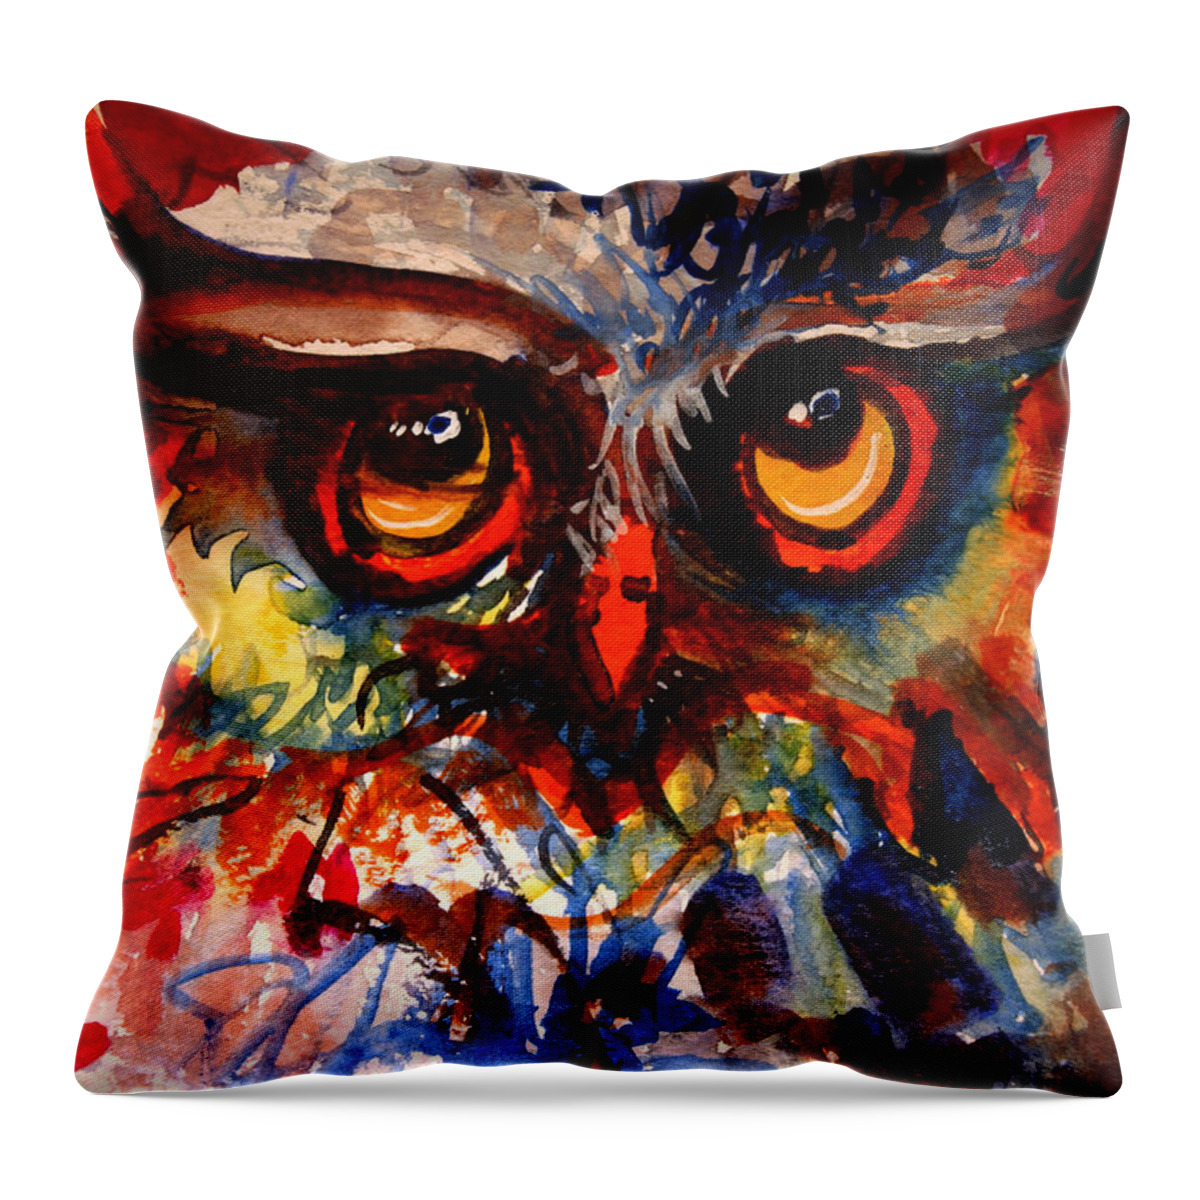 Owl Throw Pillow featuring the painting Flo by Laurel Bahe